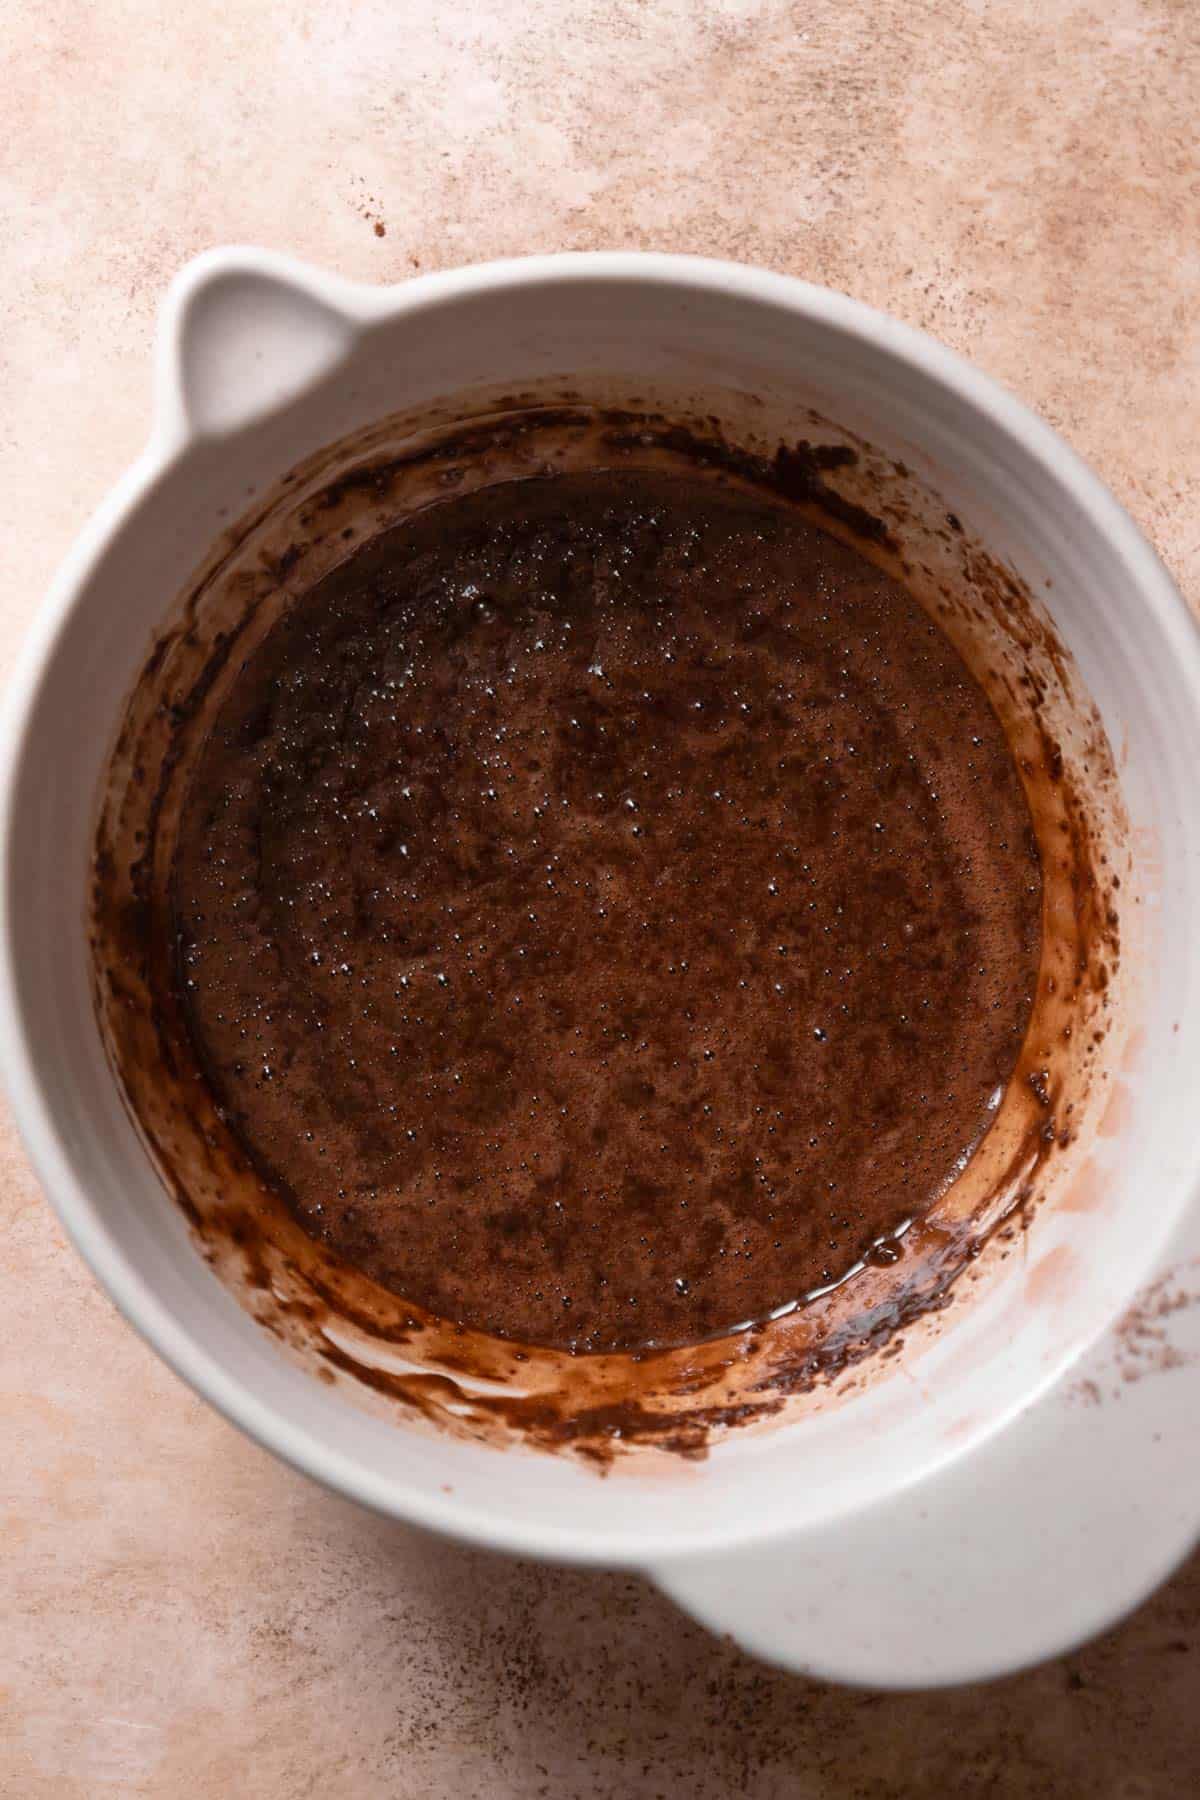 A mixing bowl with chocolate cake batter.